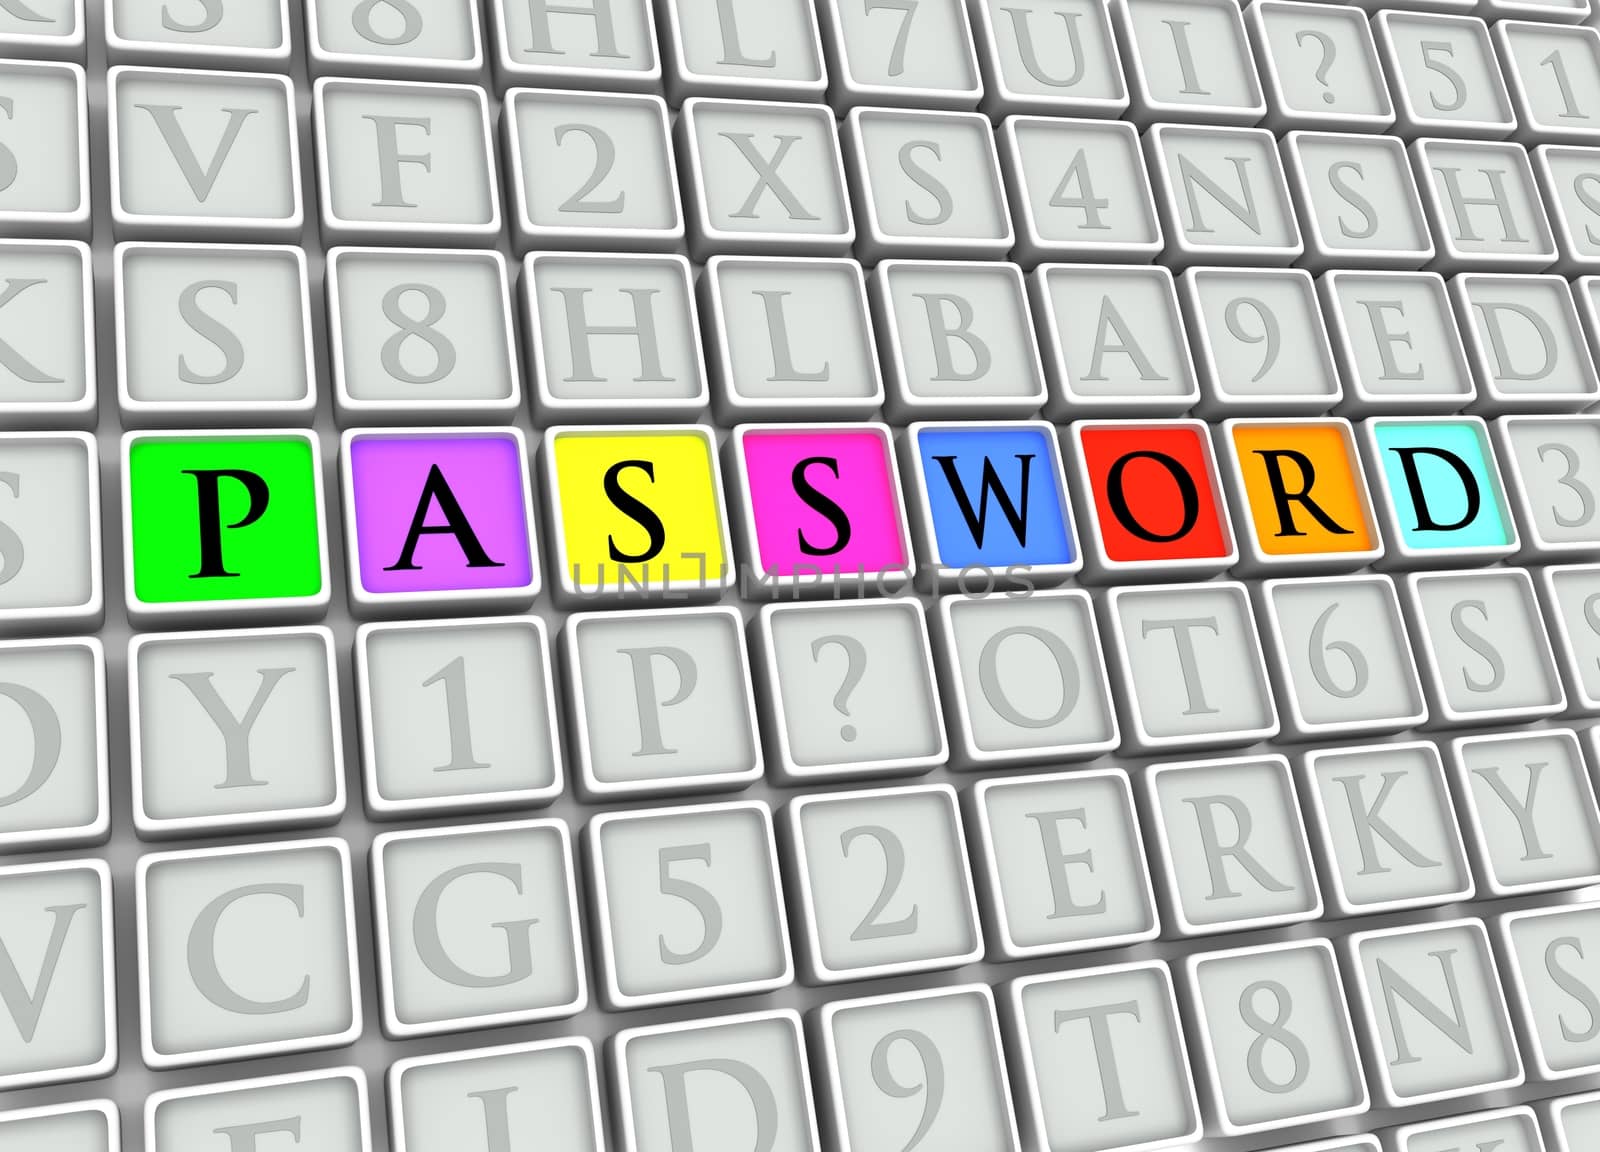 Illustrated tiles with the word "password" highlighted in colors